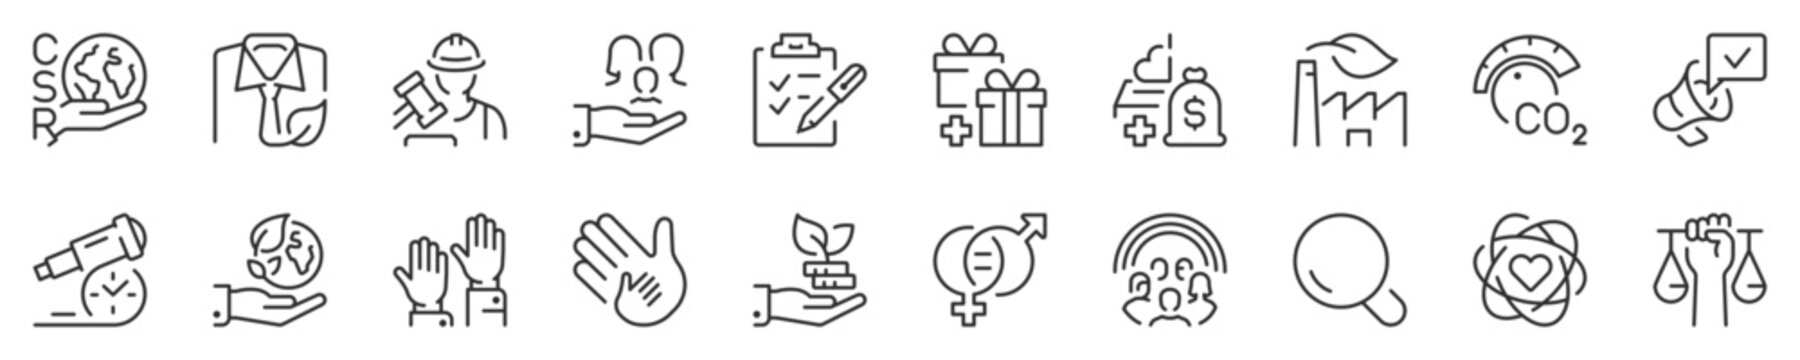 Line icons about corporate social responsibility, thin line icon set. Symbol collection in transparent background. Editable vector stroke. 512x512 Pixel Perfect.